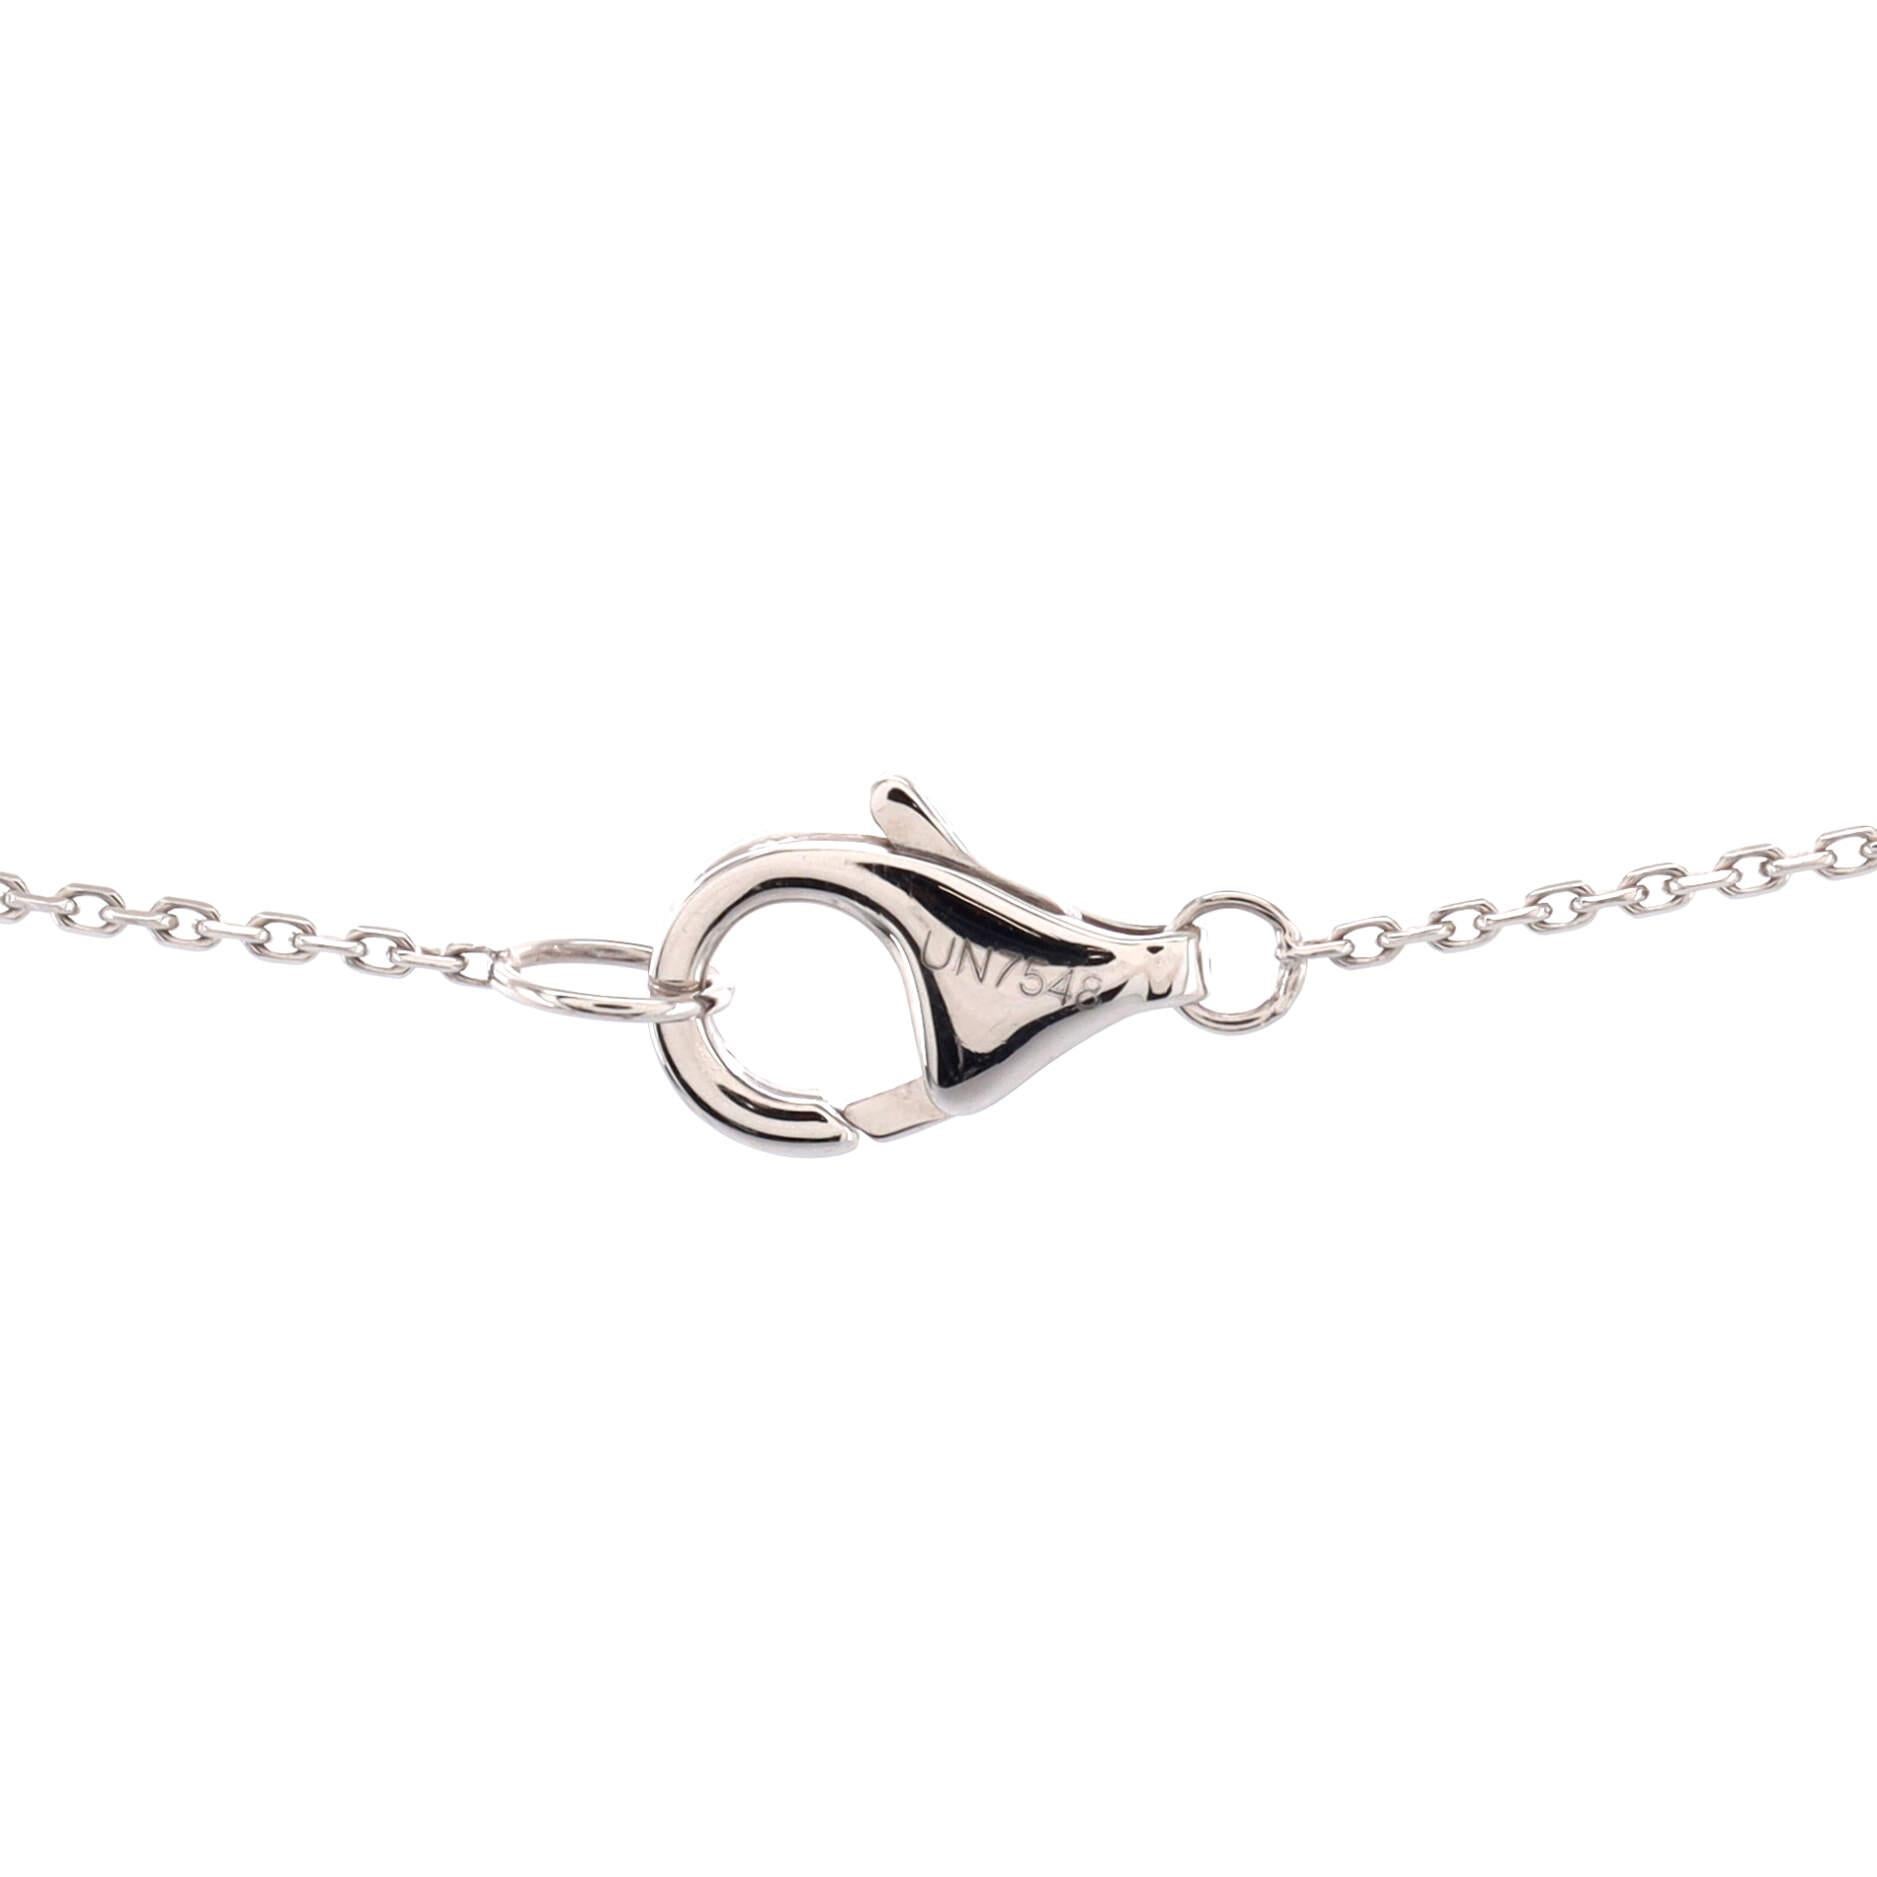 Women's or Men's Cartier Trinity Pendant Necklace 18k White Gold with Diamonds and Ceramic Small